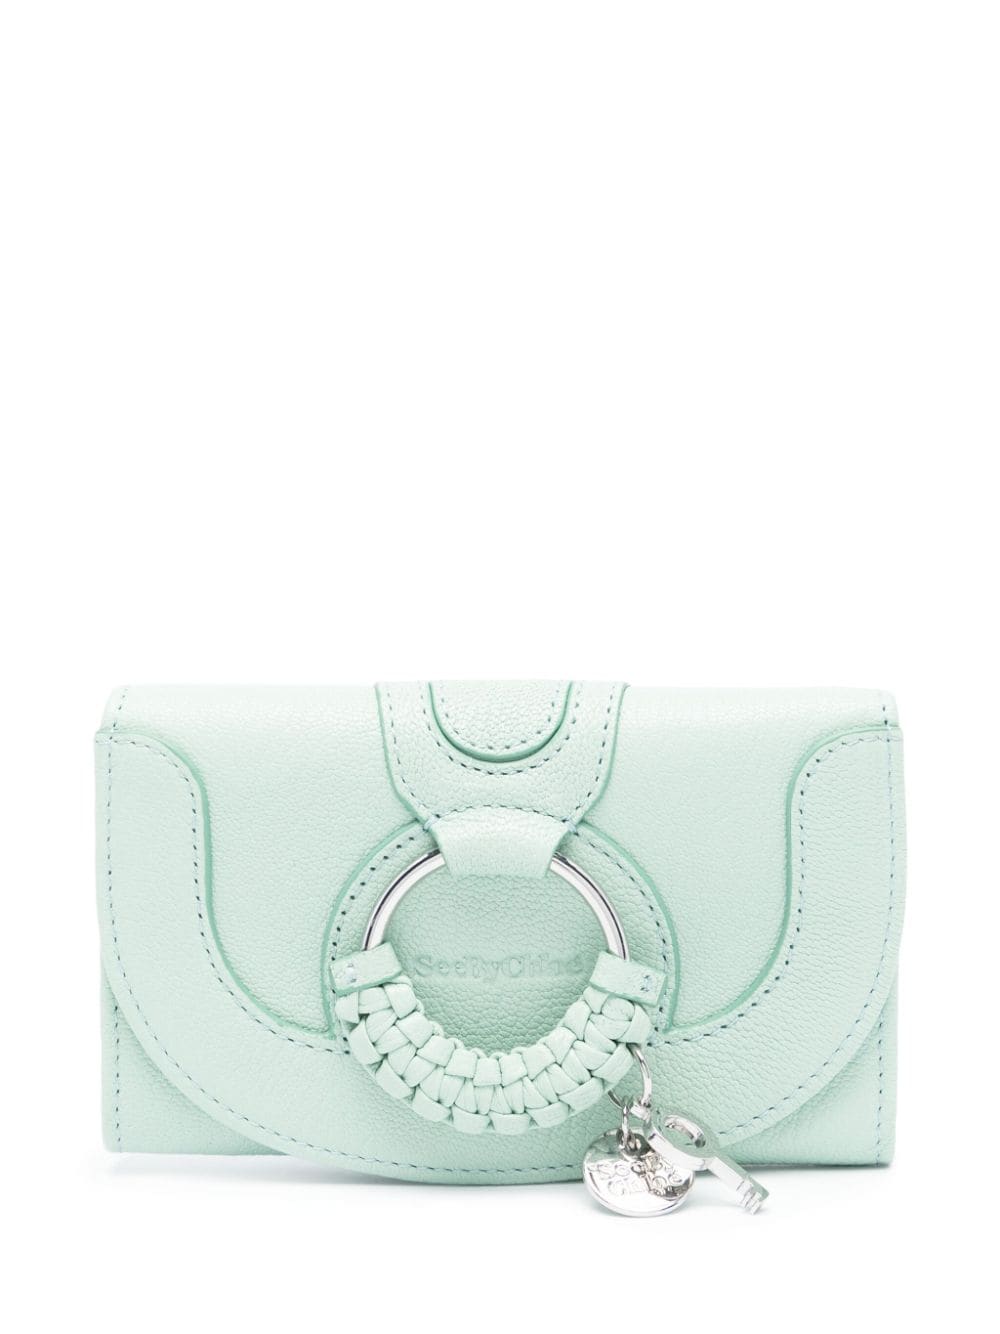 See by Chloé small Hana wallet - Blue von See by Chloé